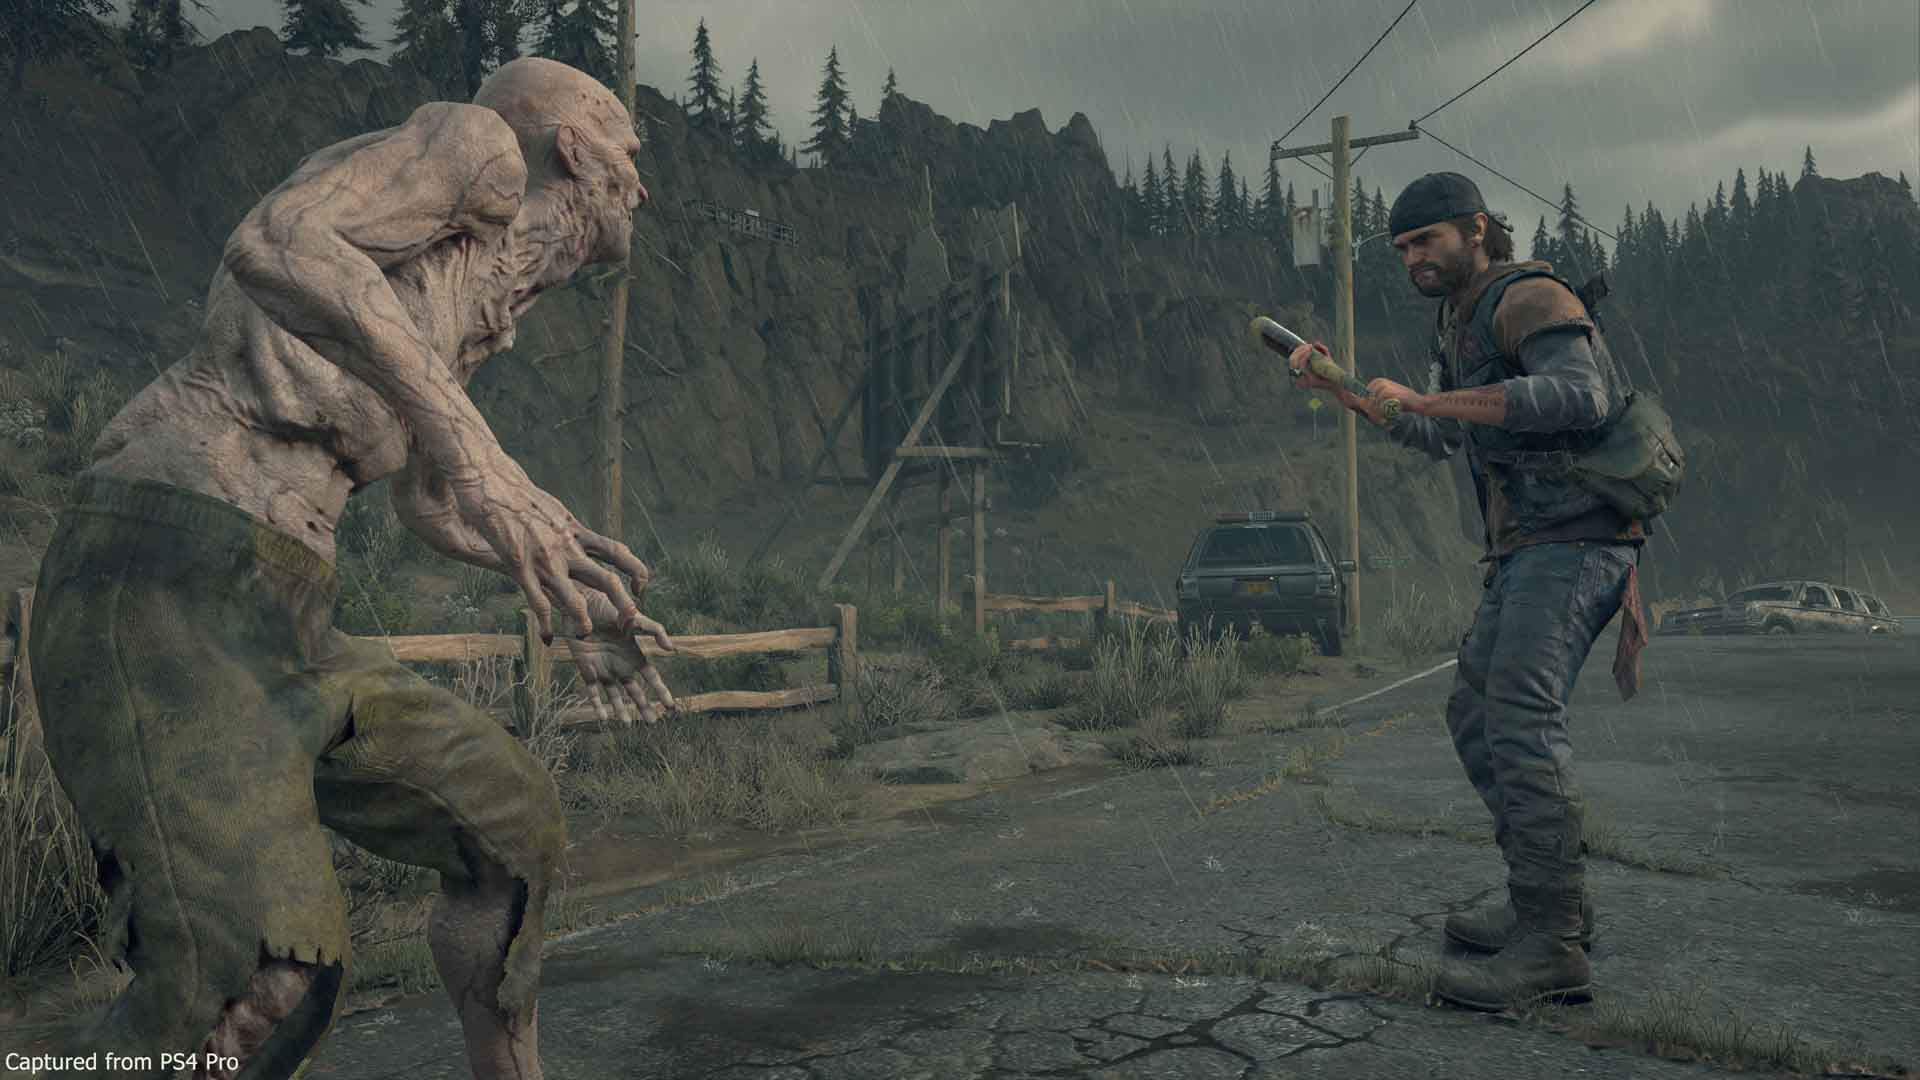 Days Gone Reviews, Pros and Cons